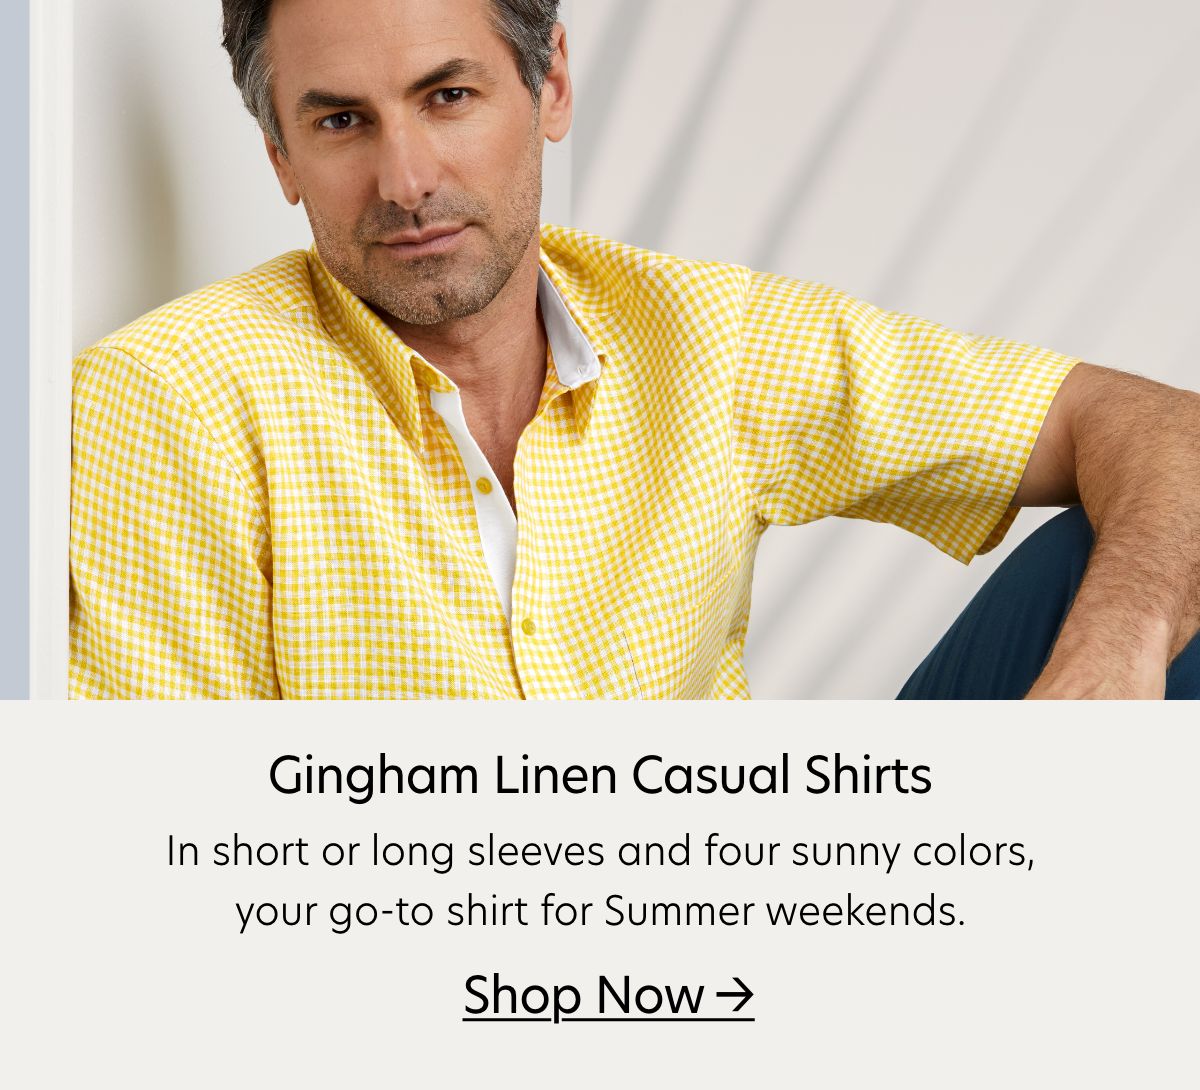 gingham linen casual shirts